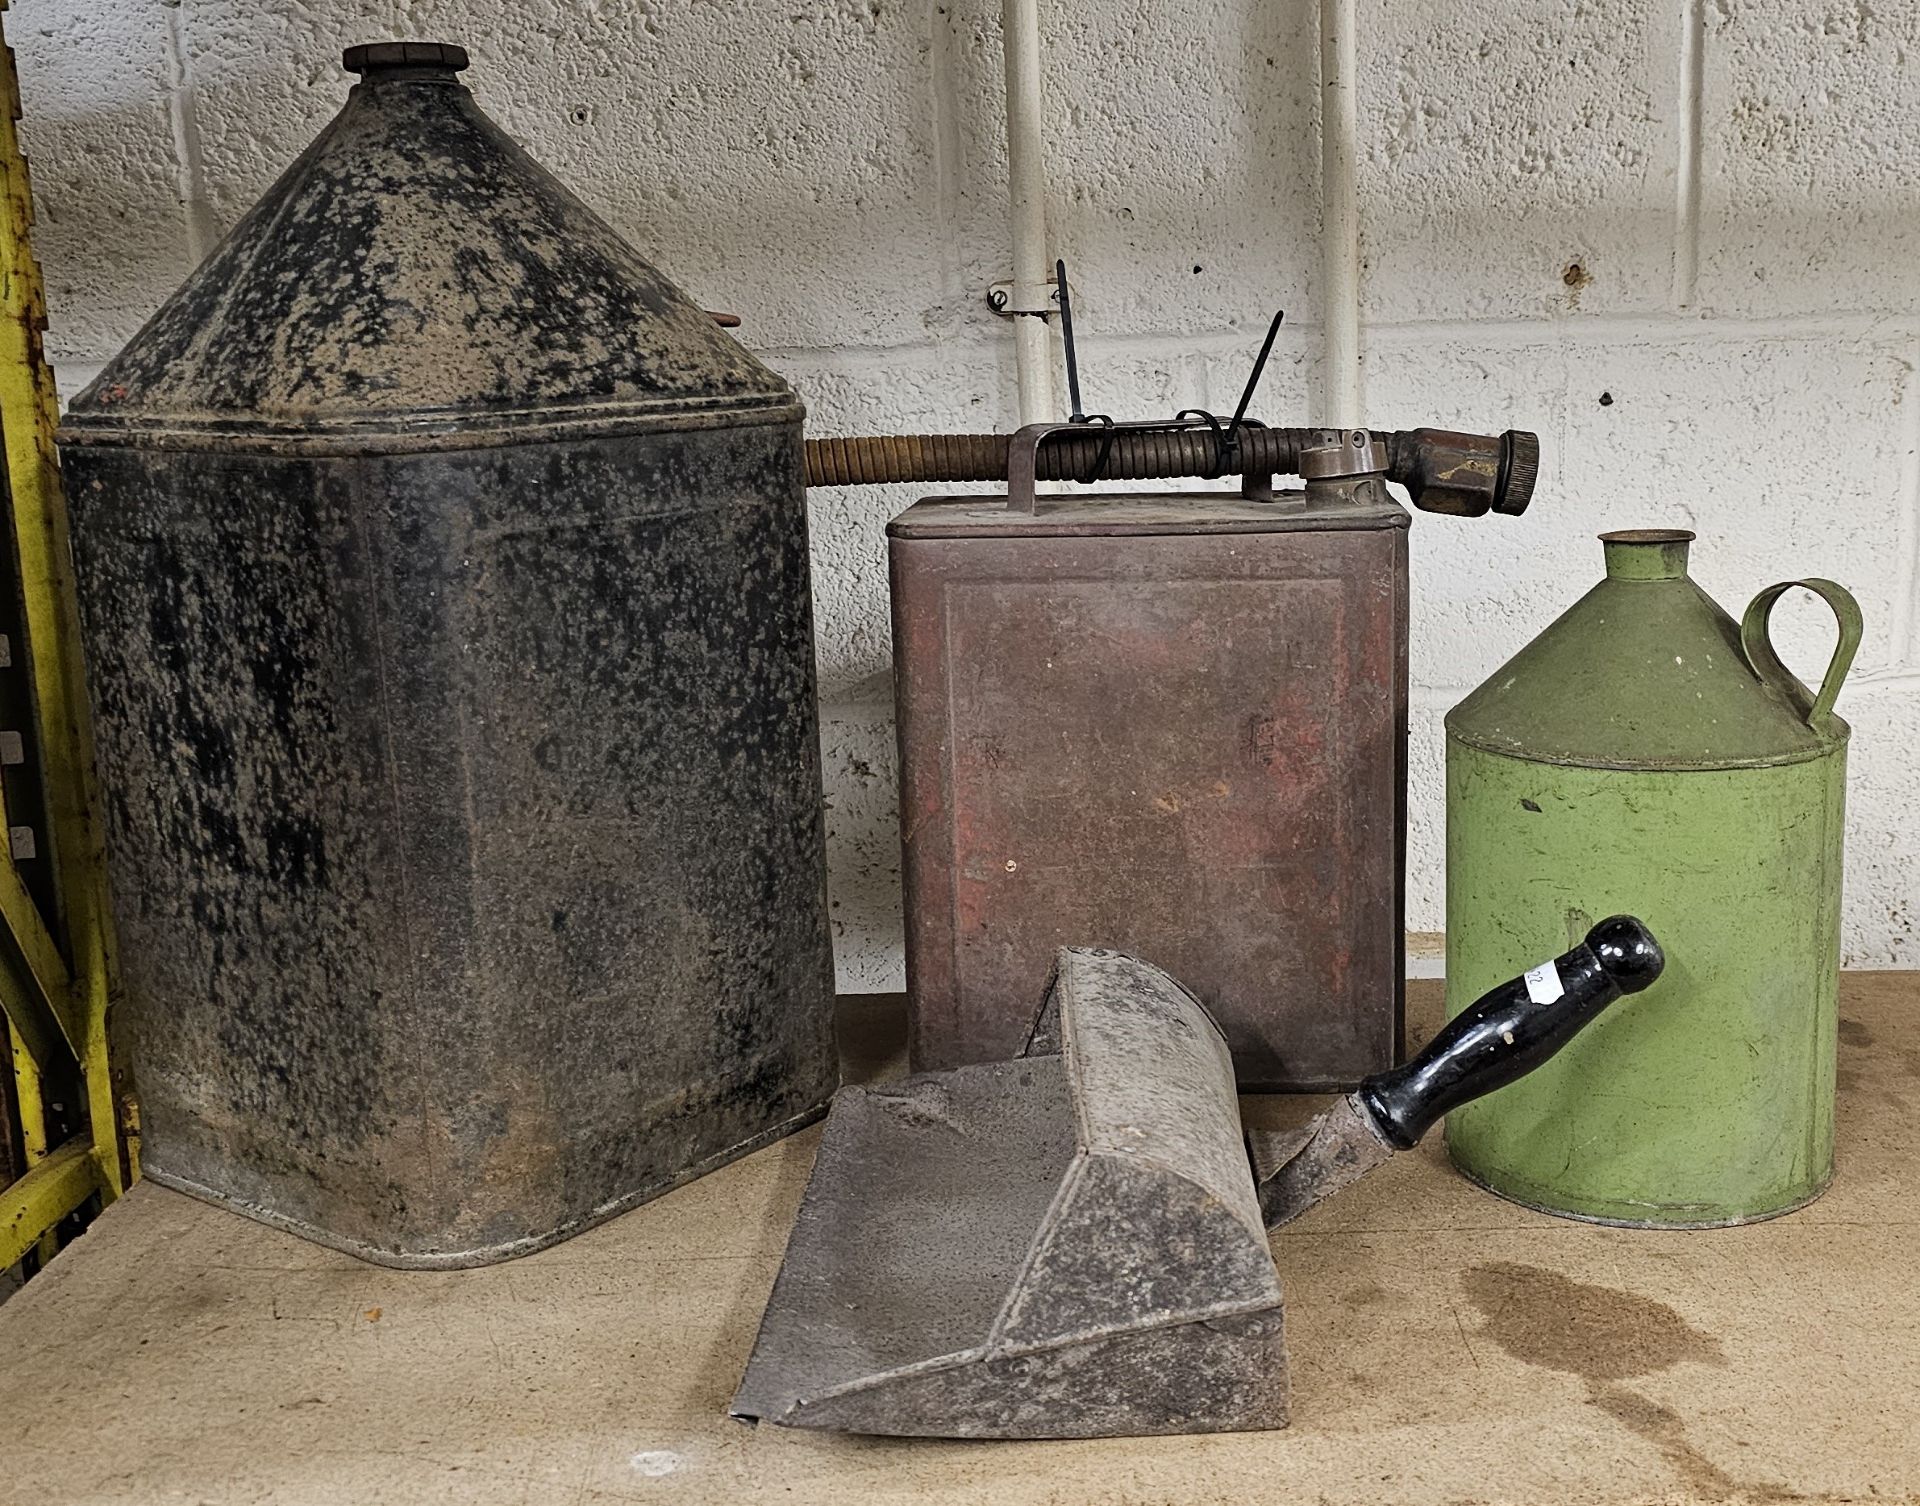 A 5 gallon pyramid can, cap, a 2 gallon petrol can, cap and pourer, another can and a dustpan.